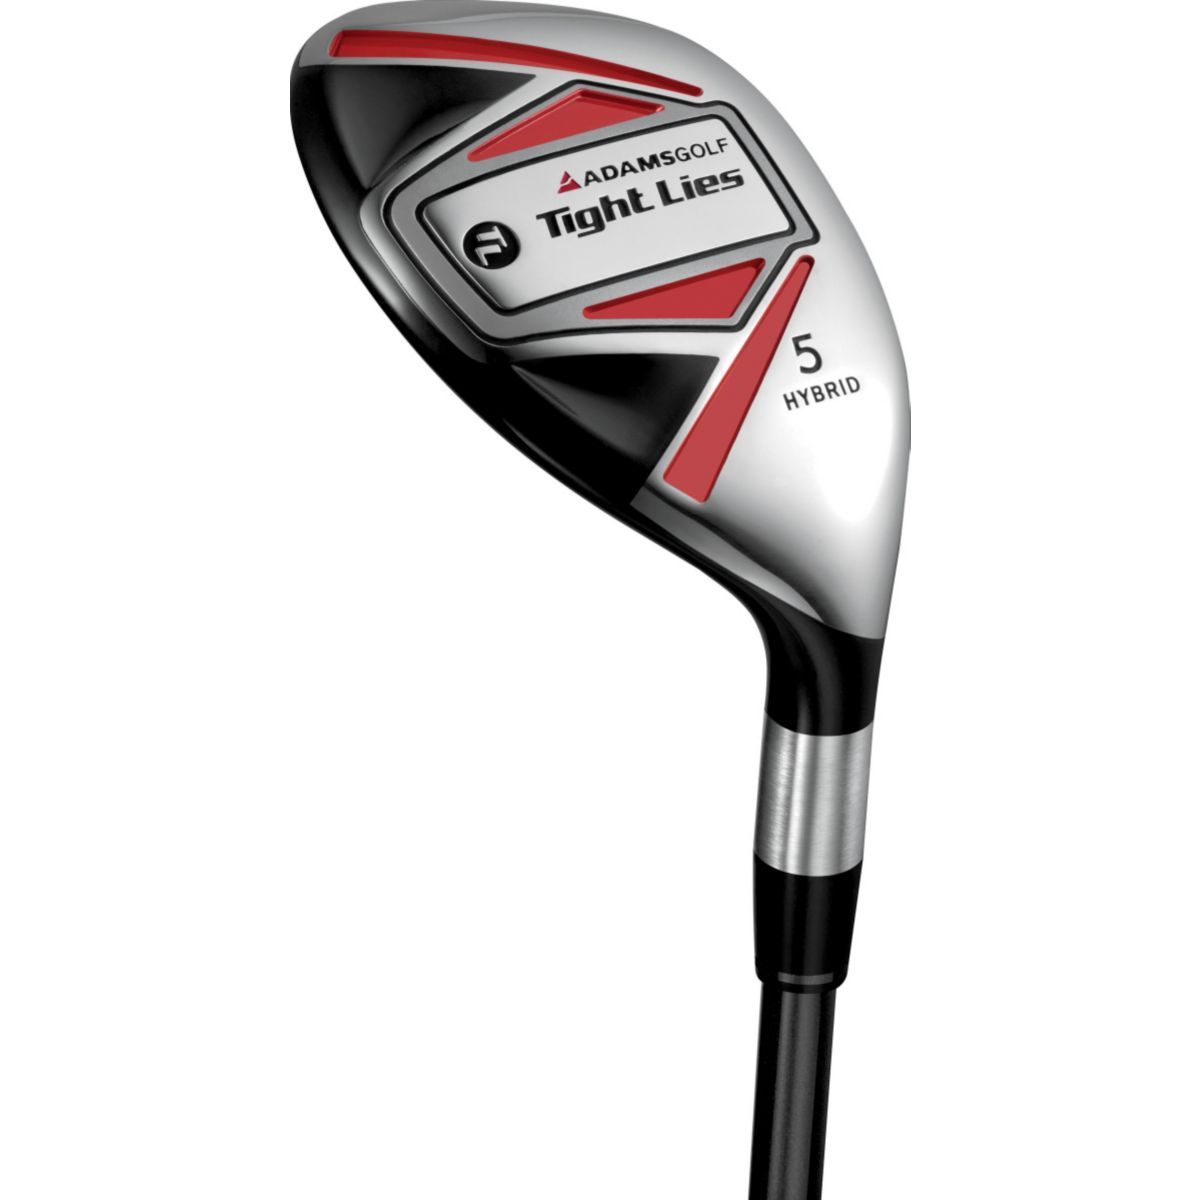 2021 Adams Tight Lies Hybrid Review - Plugged In Golf